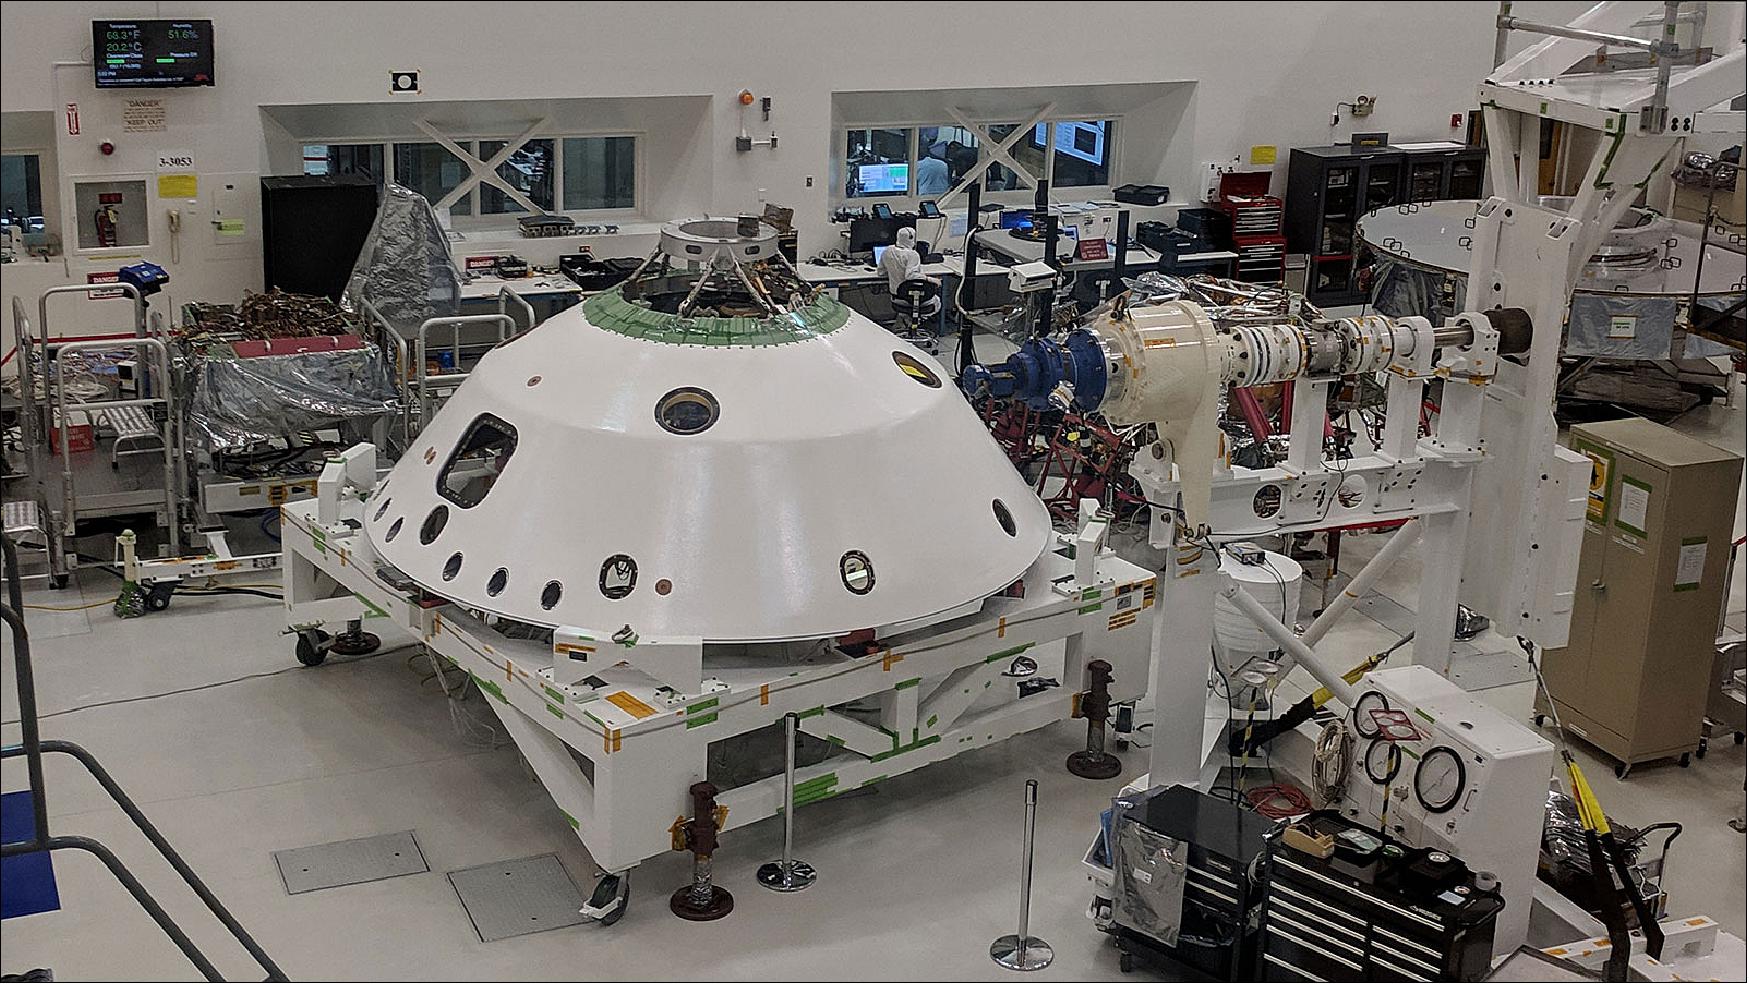 Figure 14: Lonely Vigil: With the backshell that will help protect the Mars 2020 rover during its descent into the Martian atmosphere visible in the foreground, a technician on the project monitors the progress of Systems Test 1 (image credit: NASA/JPL-Caltech)